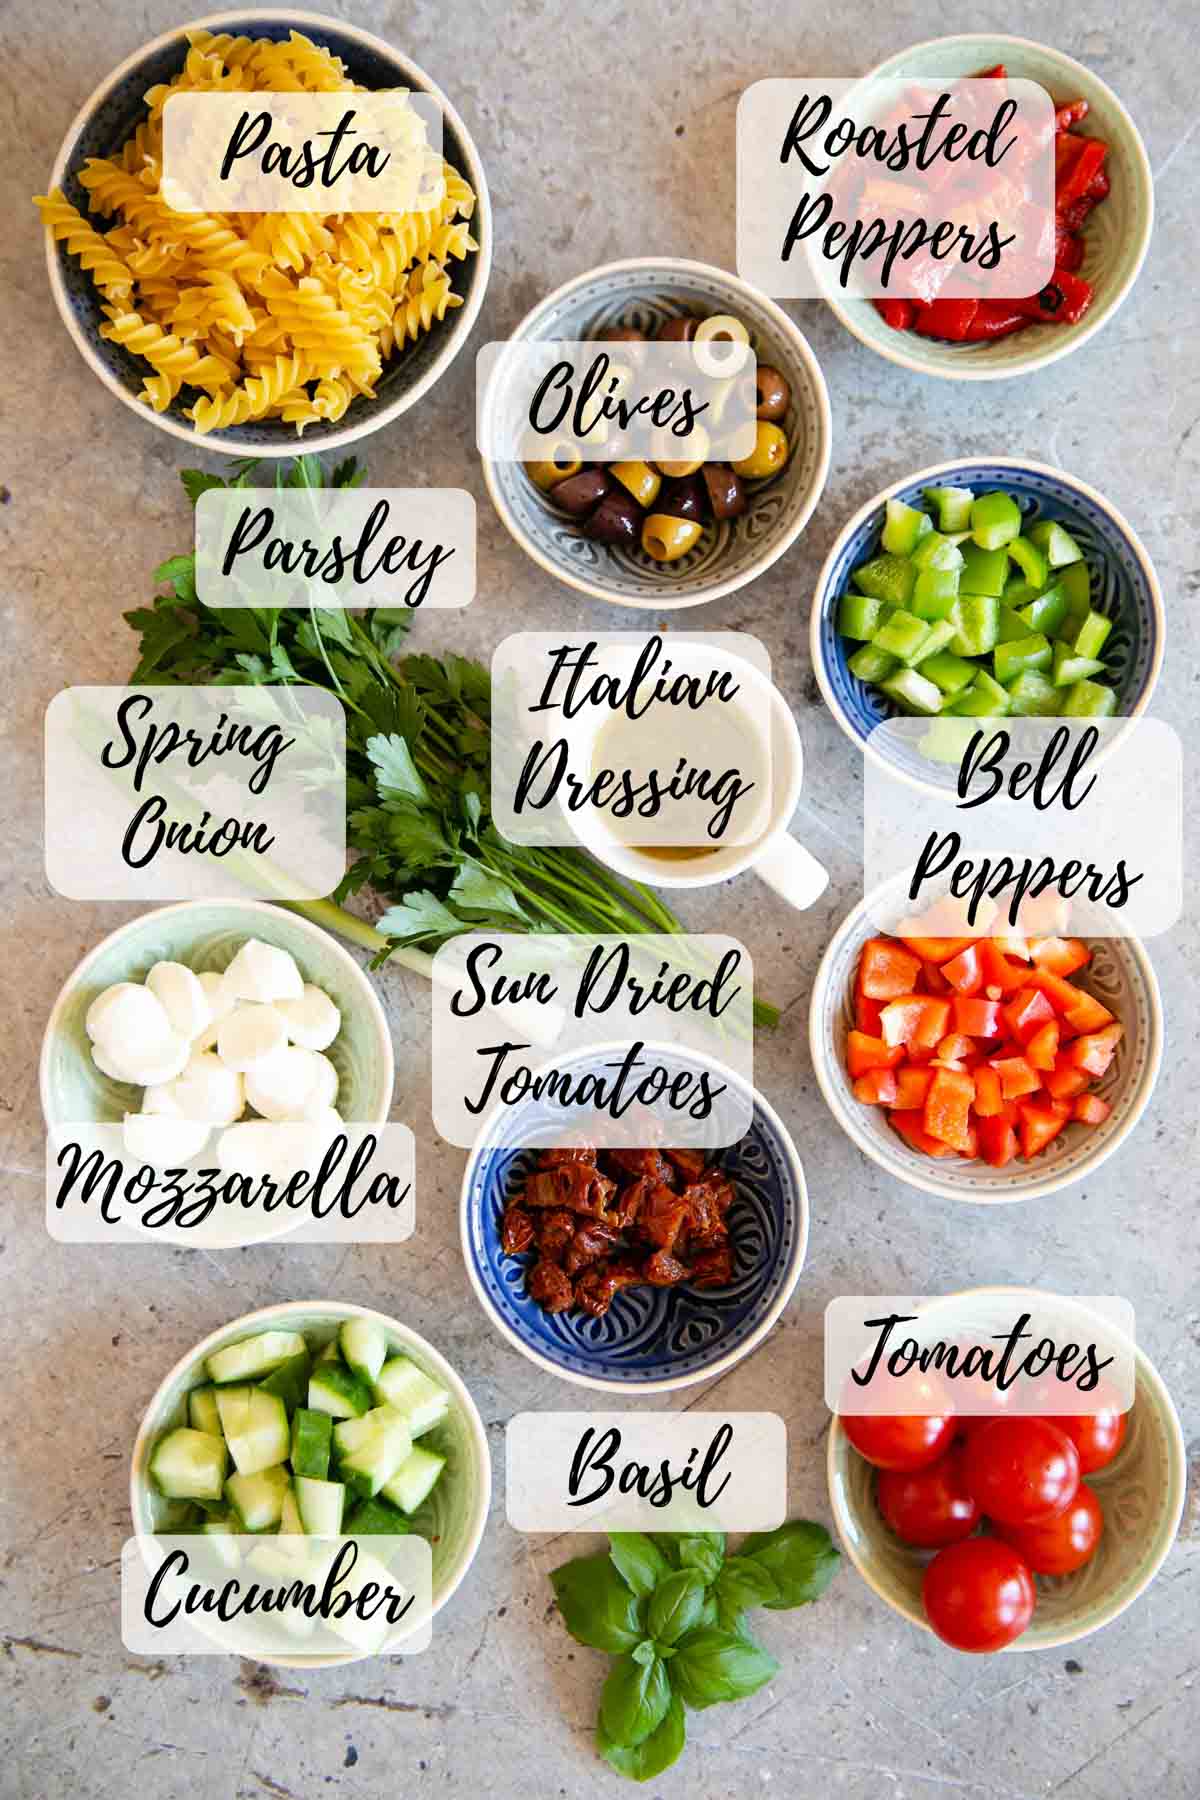 Ingredients for Italian pasta salad: dried pasta shapes, olives, roasted peppers, fresh red and green peppers, fresh and sundried tomatoes, basil, cucumber, mozzarella balls, spring onion, parsley and Italian dressing.